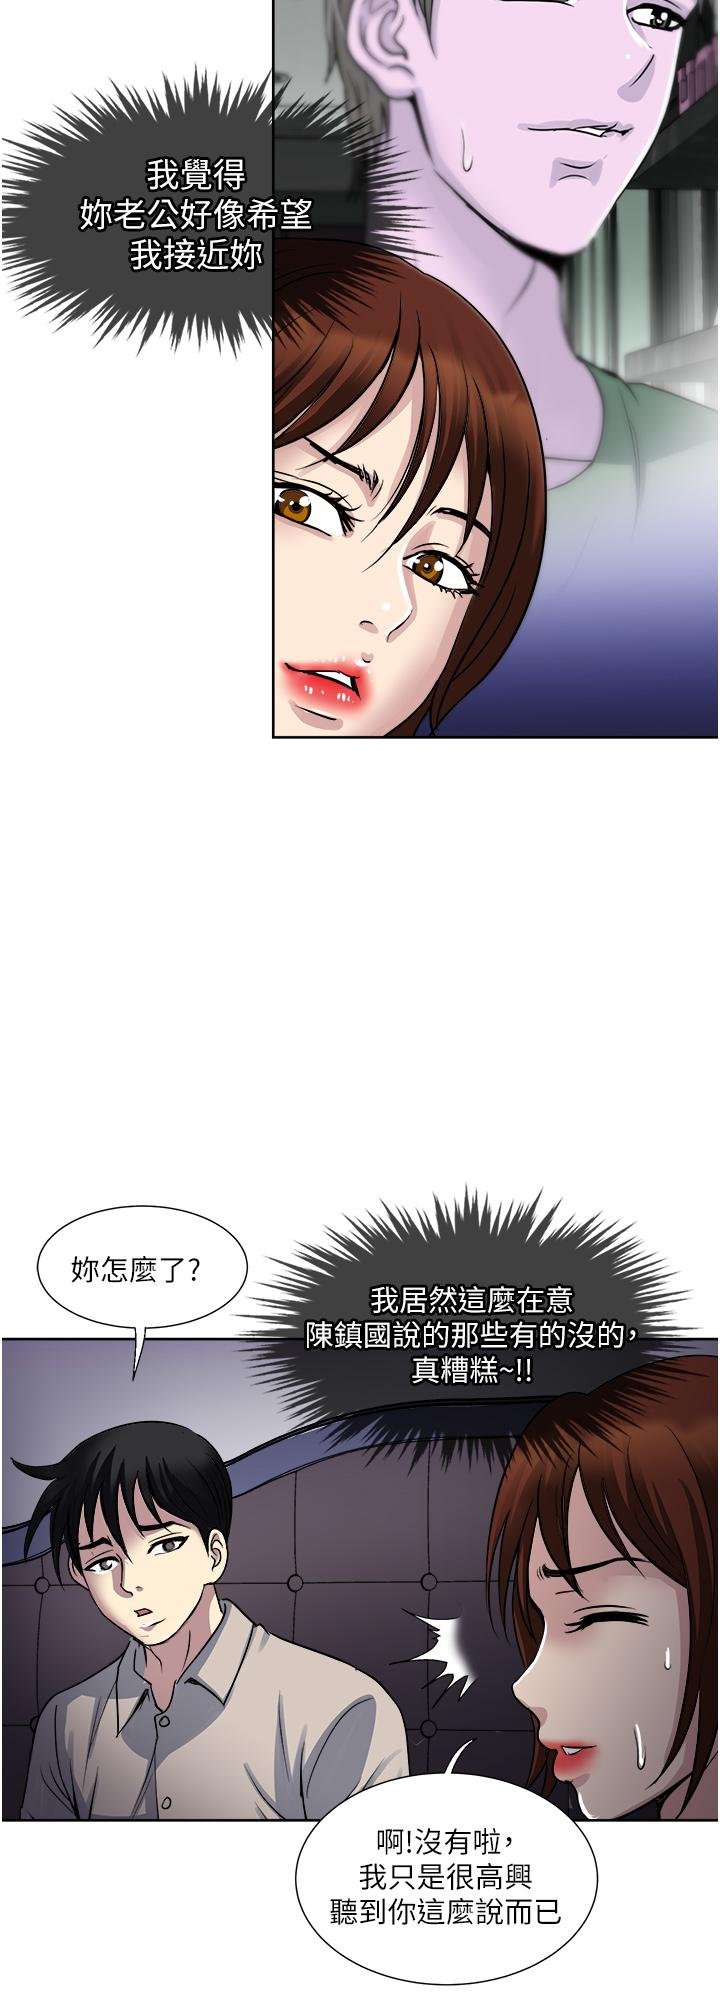 just-once-raw-chap-37-25